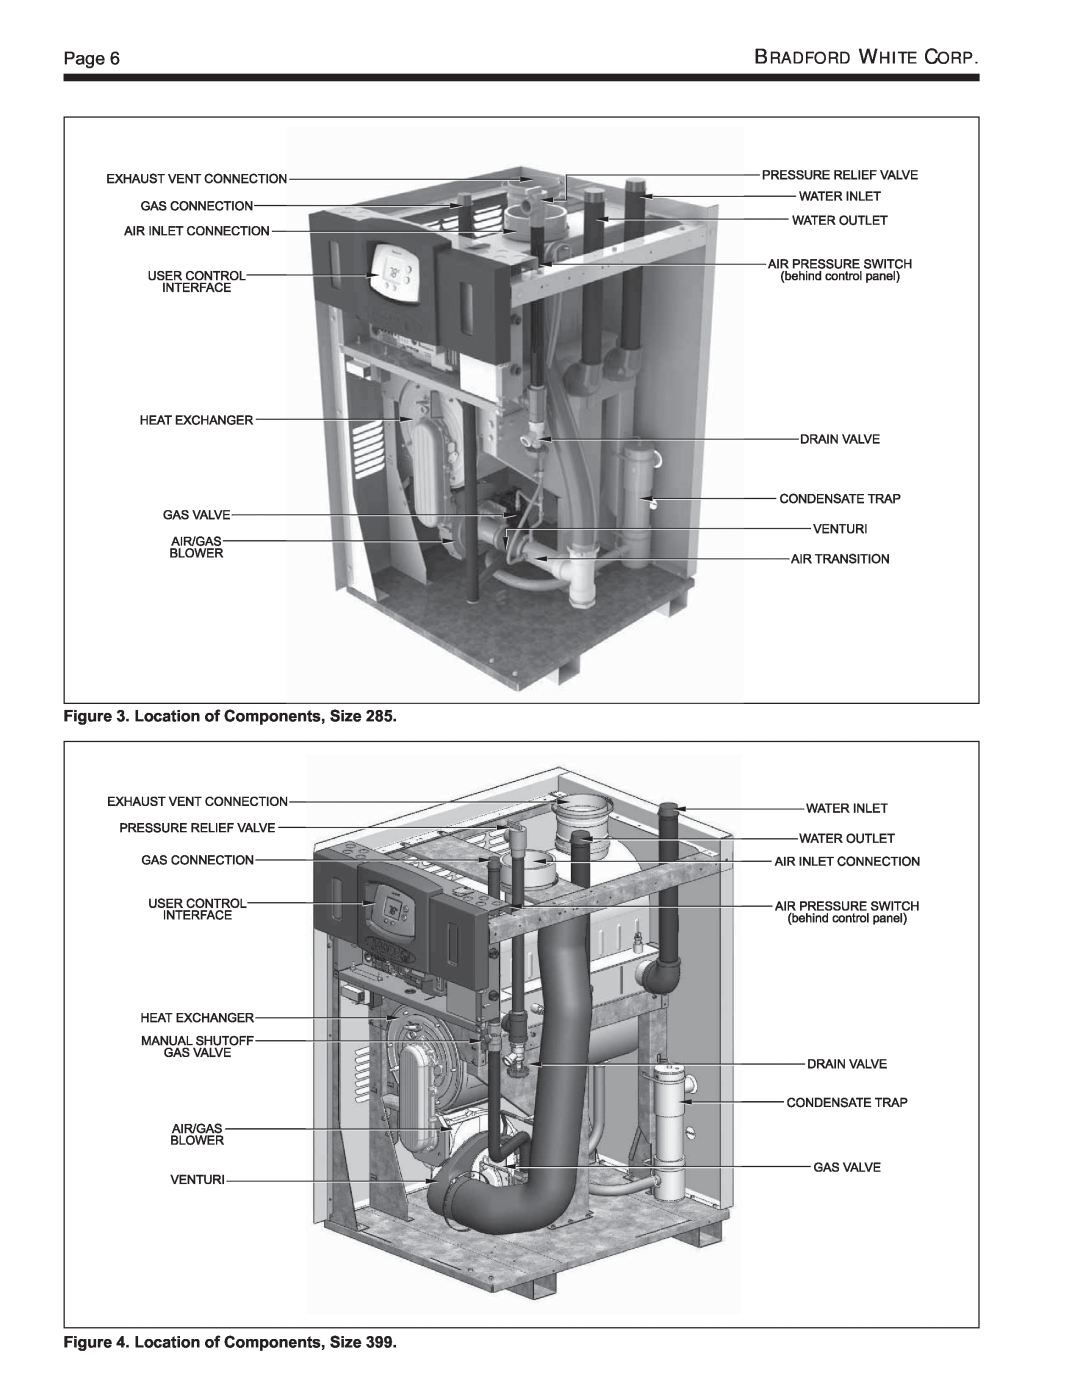 Bradford-White Corp BNTH, BNTV, Modulating Boiler warranty Page, Location of Components, Size 